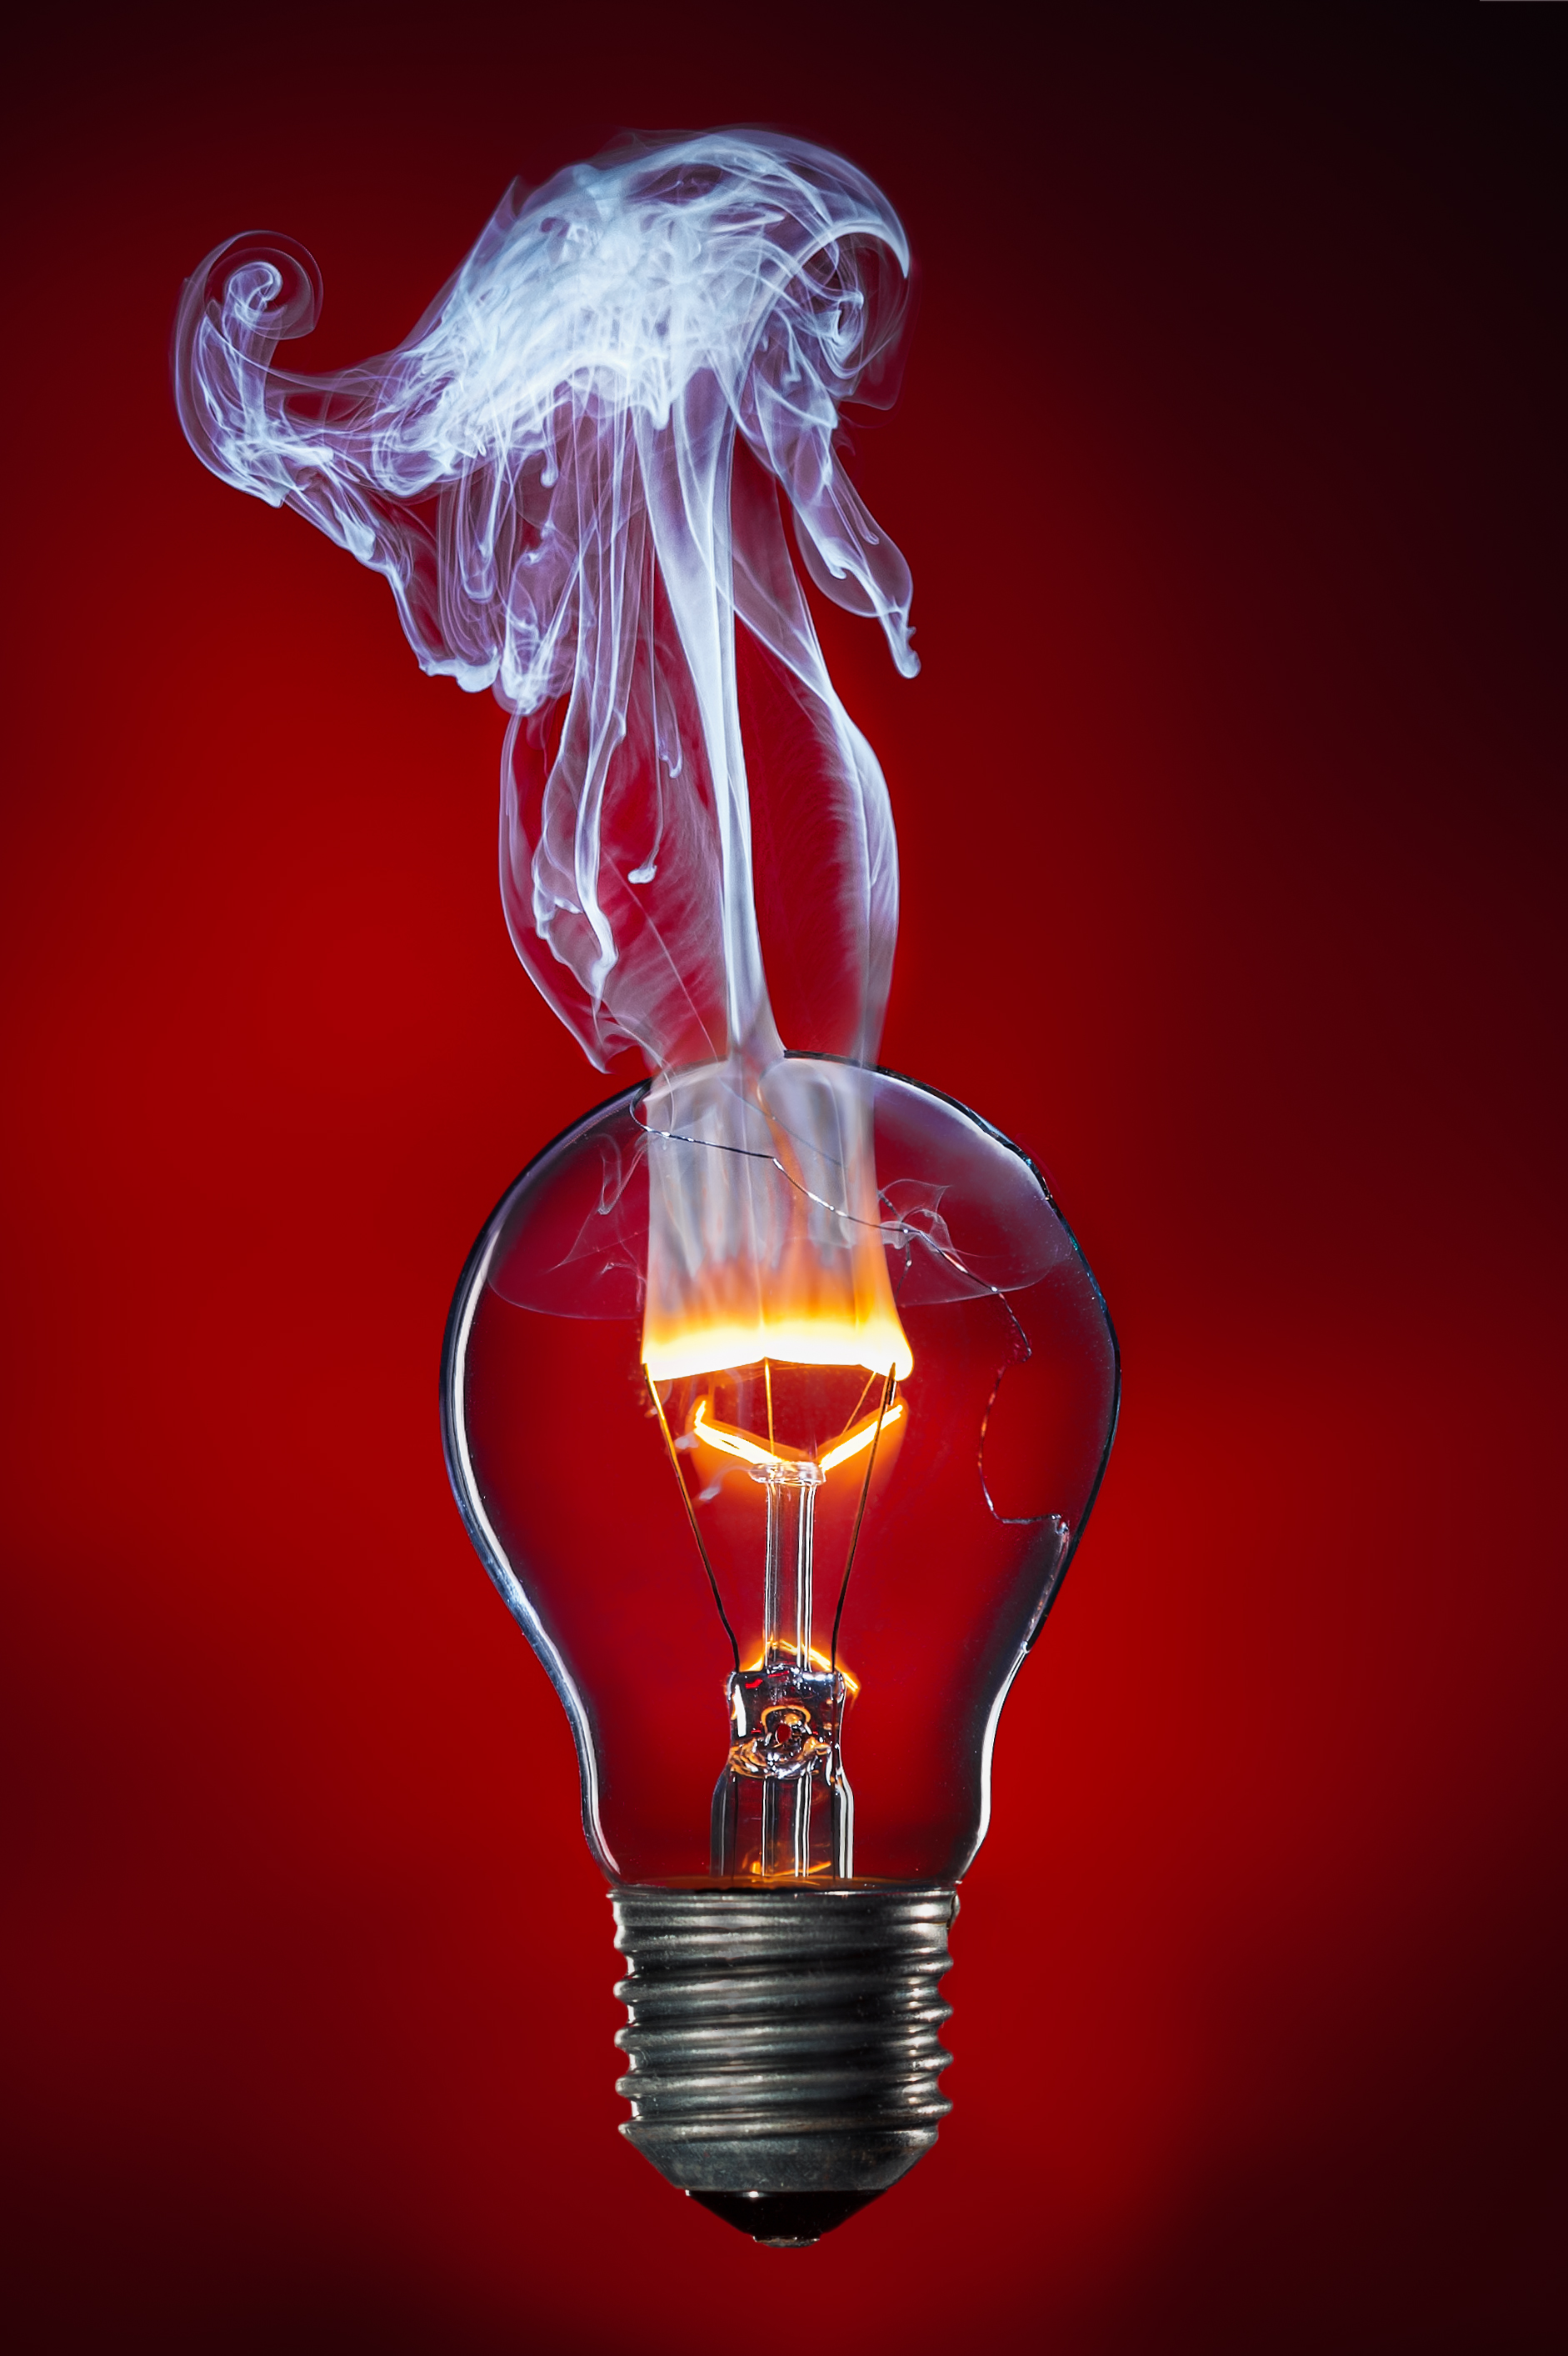 Burning filament of a light bulb with damaged glass bulb by Stefan Krause